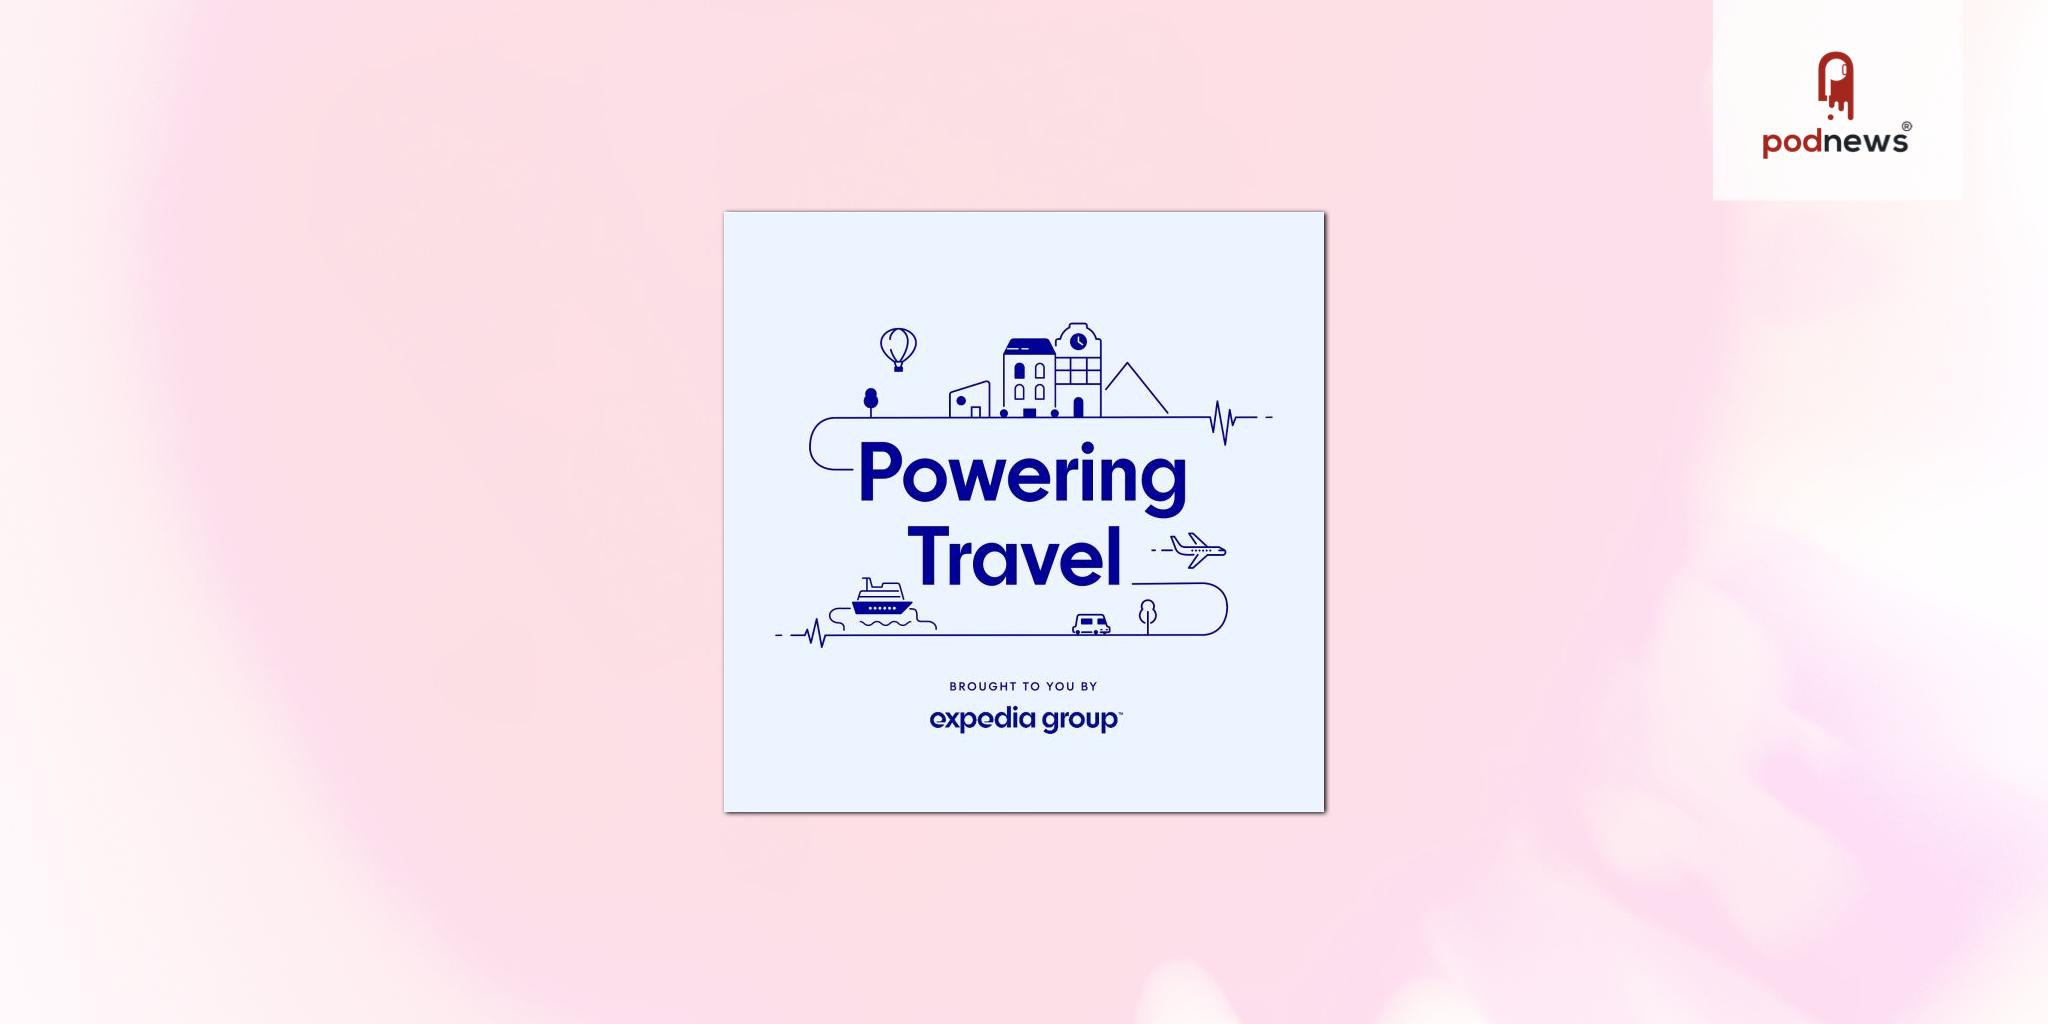 Expedia Group's Powering Travel Podcast: Celebrating Innovation and Delivering Progressive Industry Insights